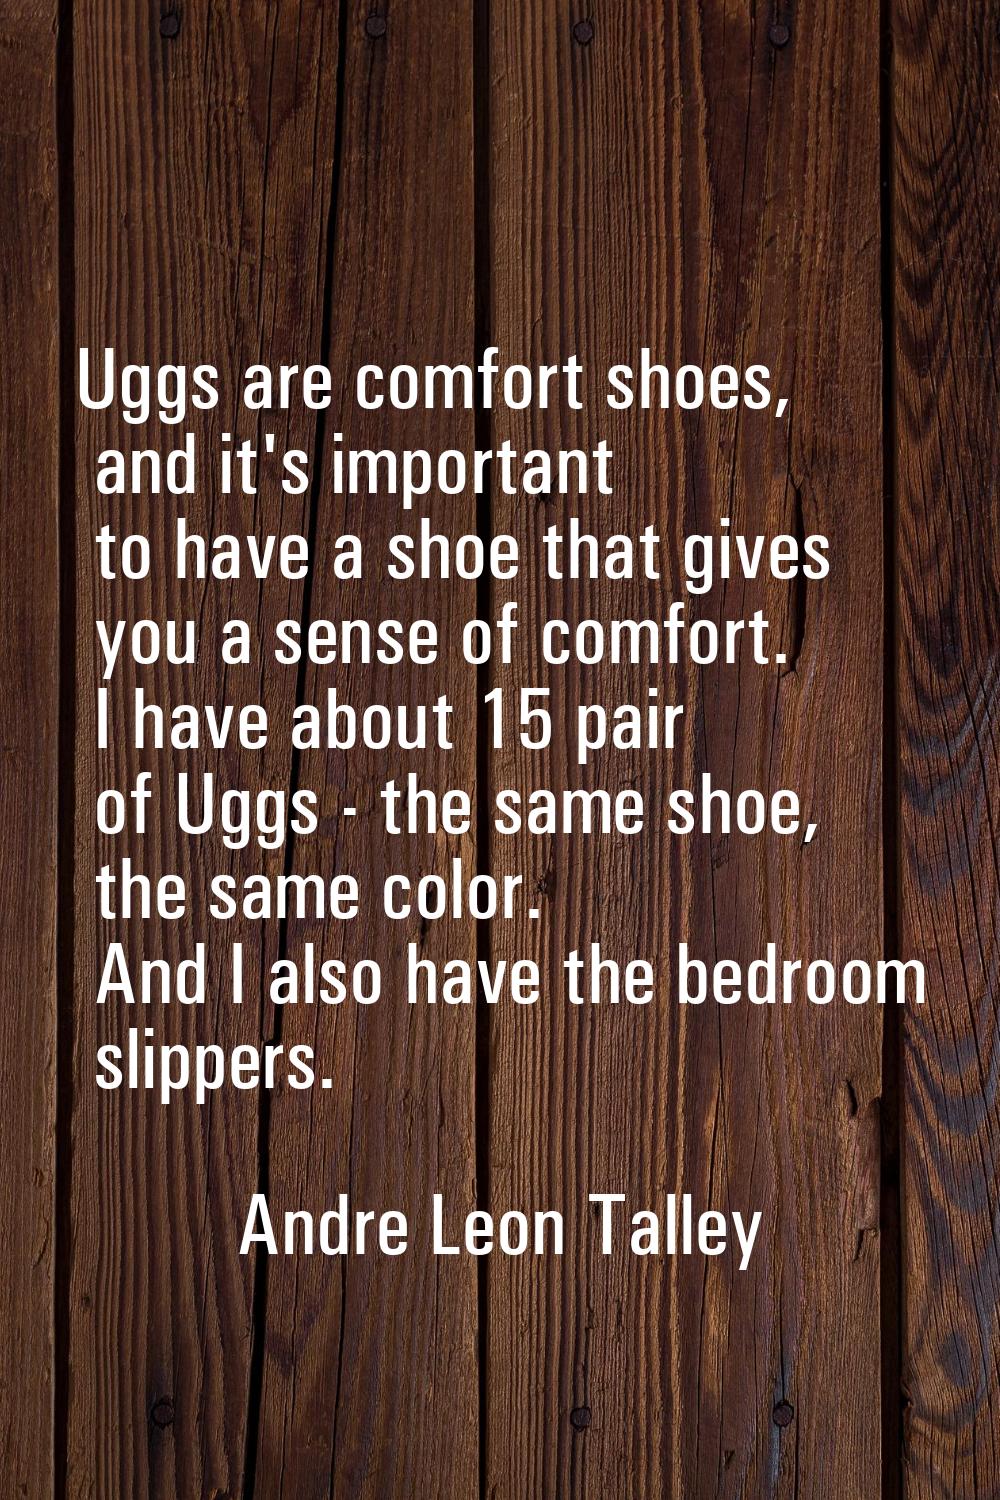 Uggs are comfort shoes, and it's important to have a shoe that gives you a sense of comfort. I have